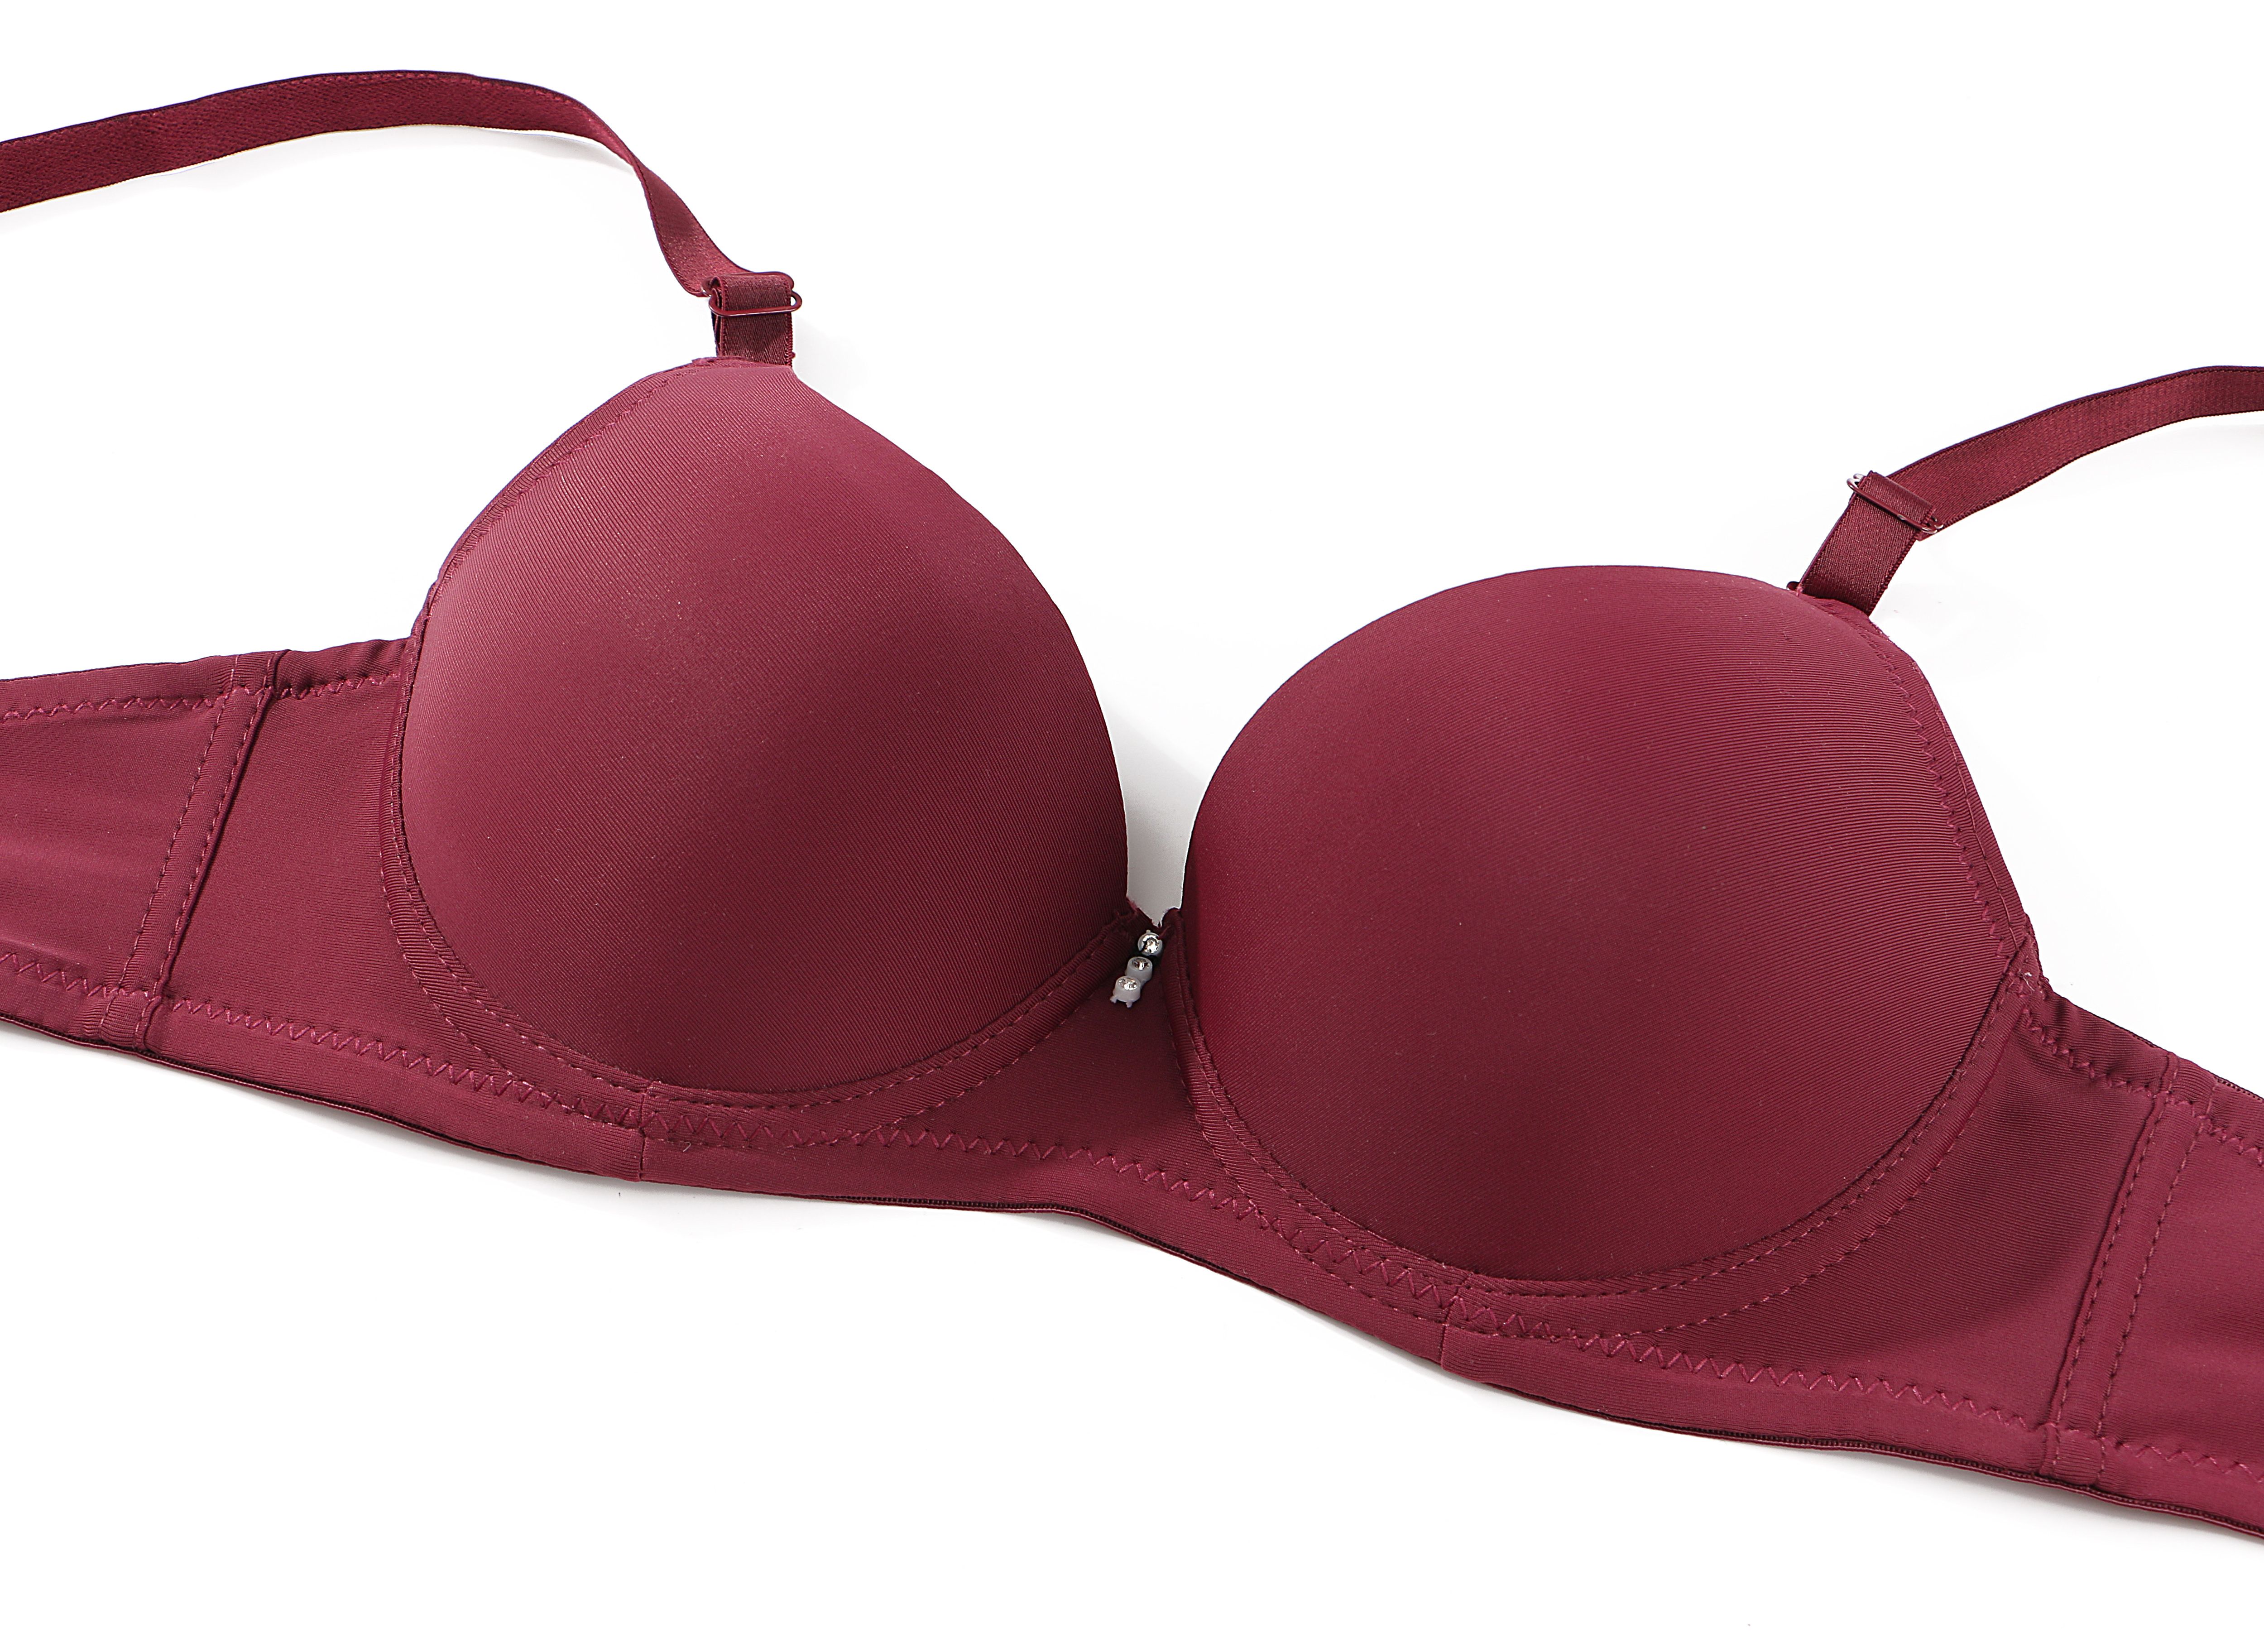 New Isabelle.Q CUP A removable straps thin foam bra w/ wire ZLH862